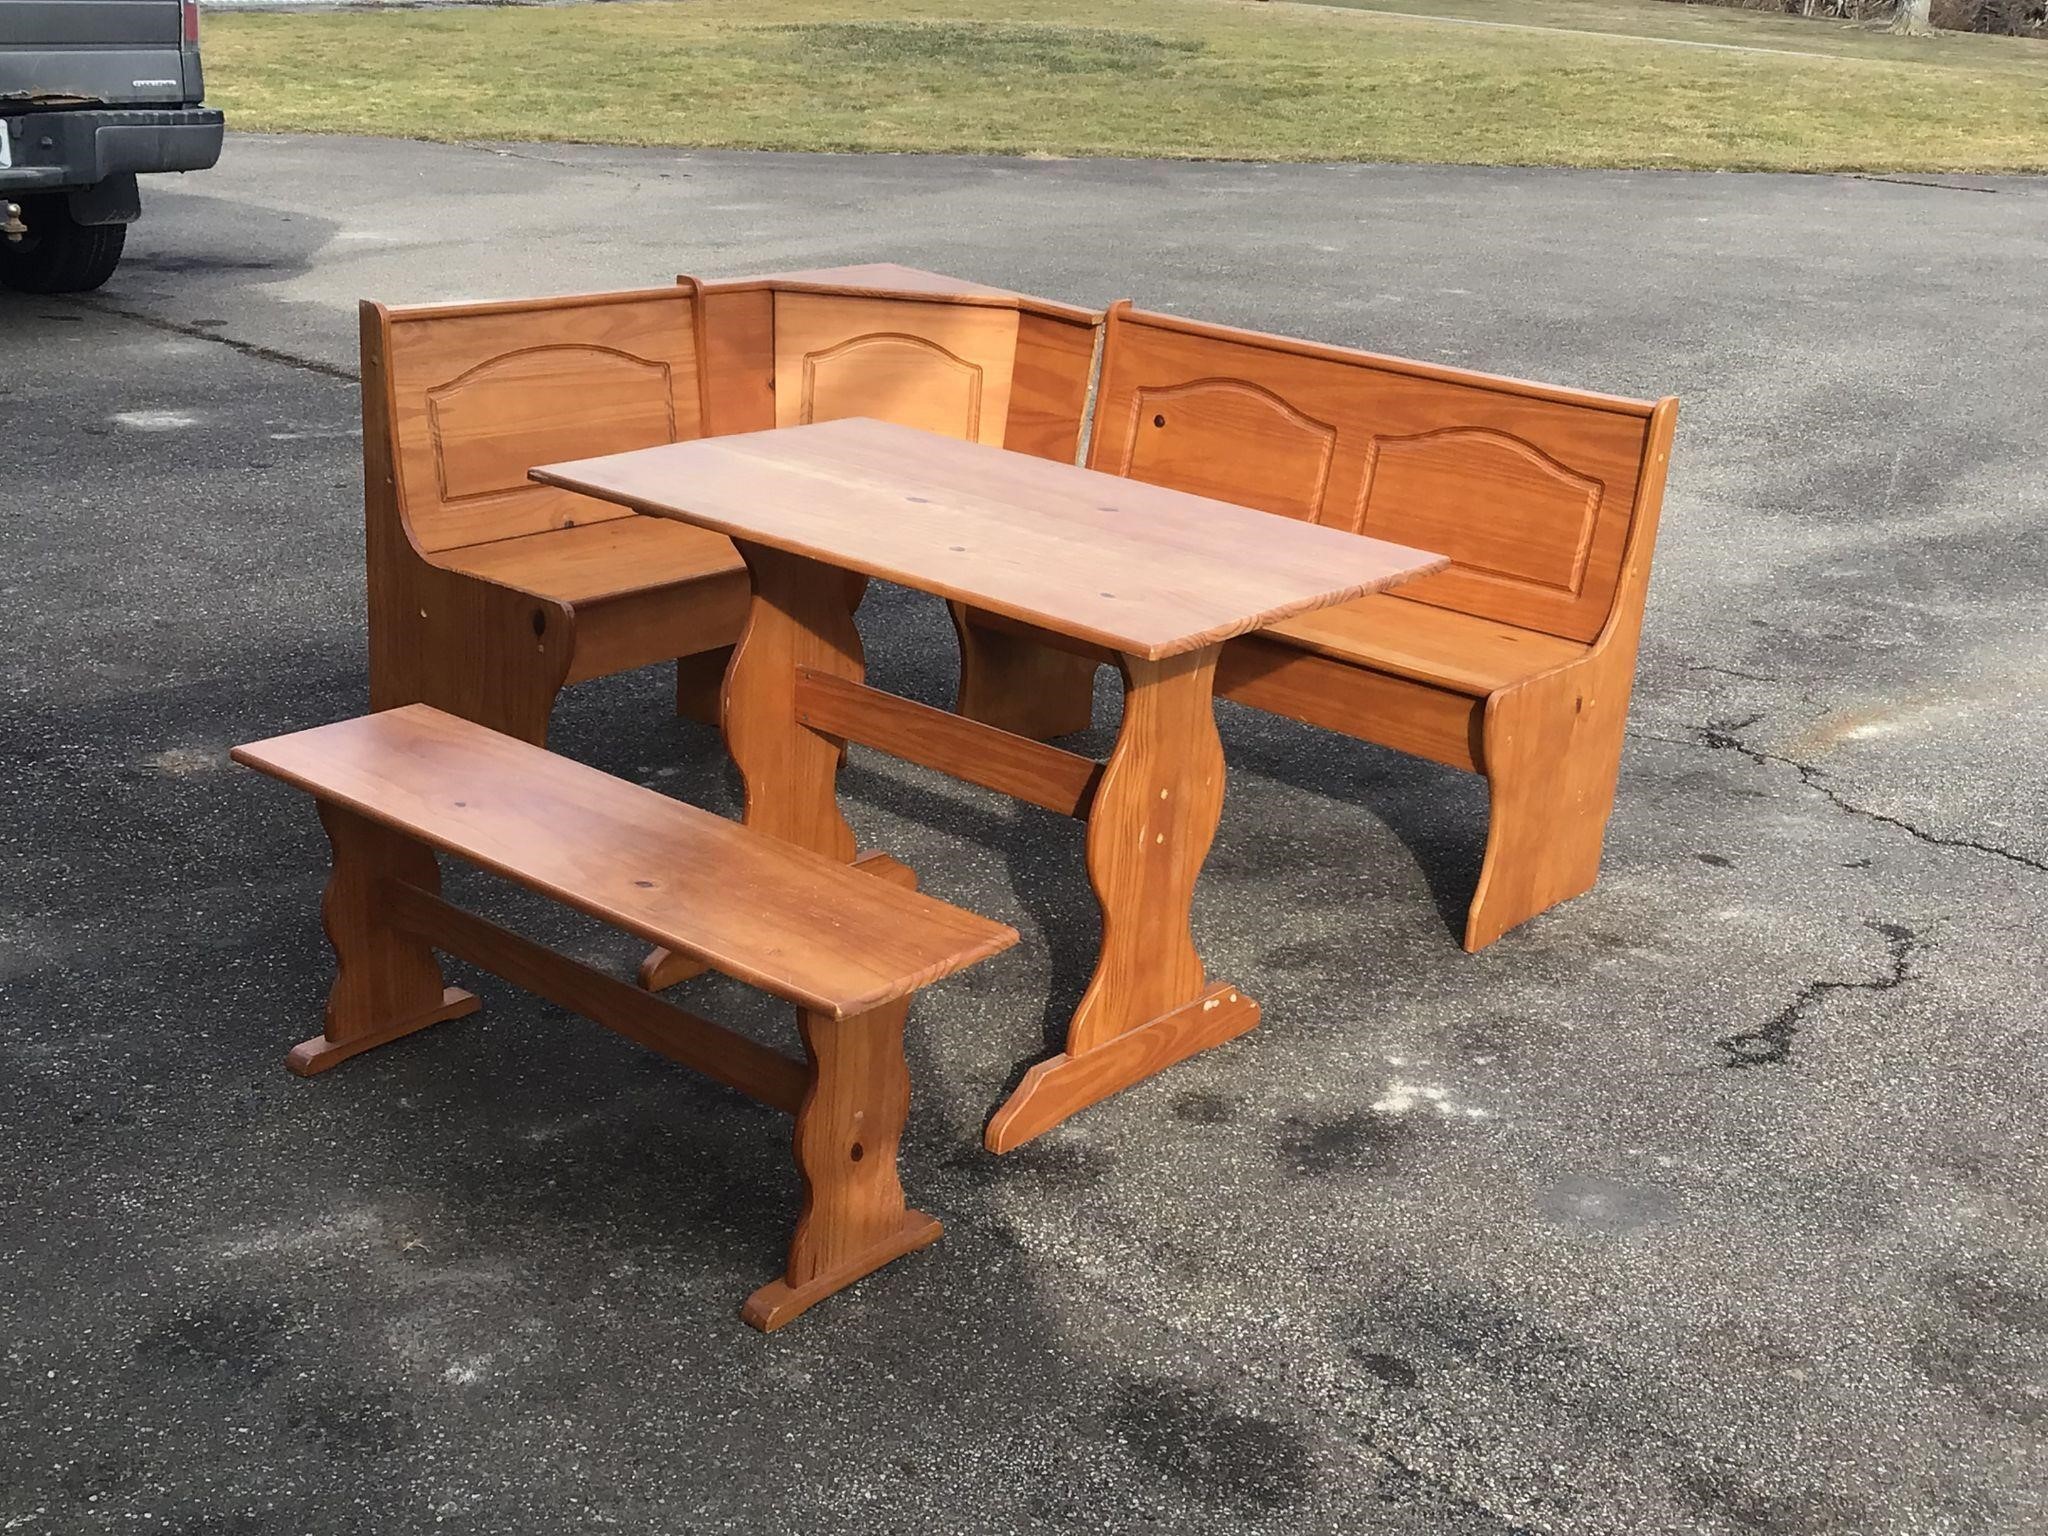 KITCHEN SET -NICE SET -table benches long bench,